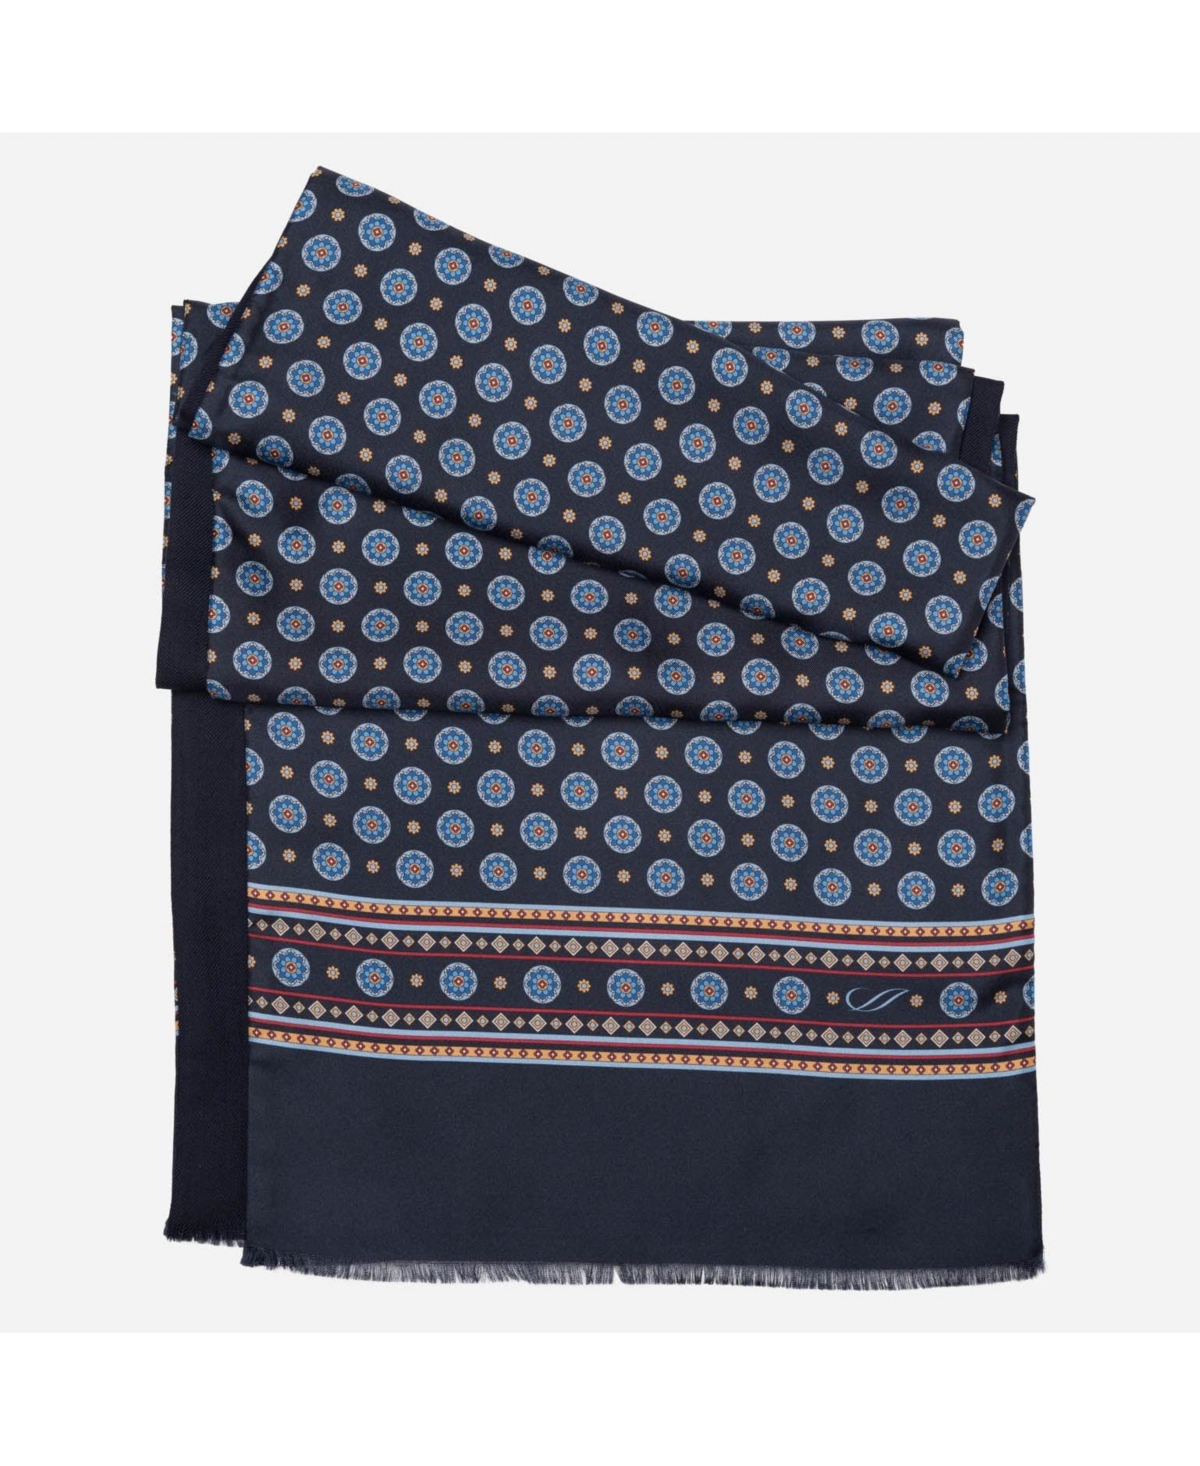 Men's Palatino - Wool Backed Silk Scarf for Men - Navy and blue